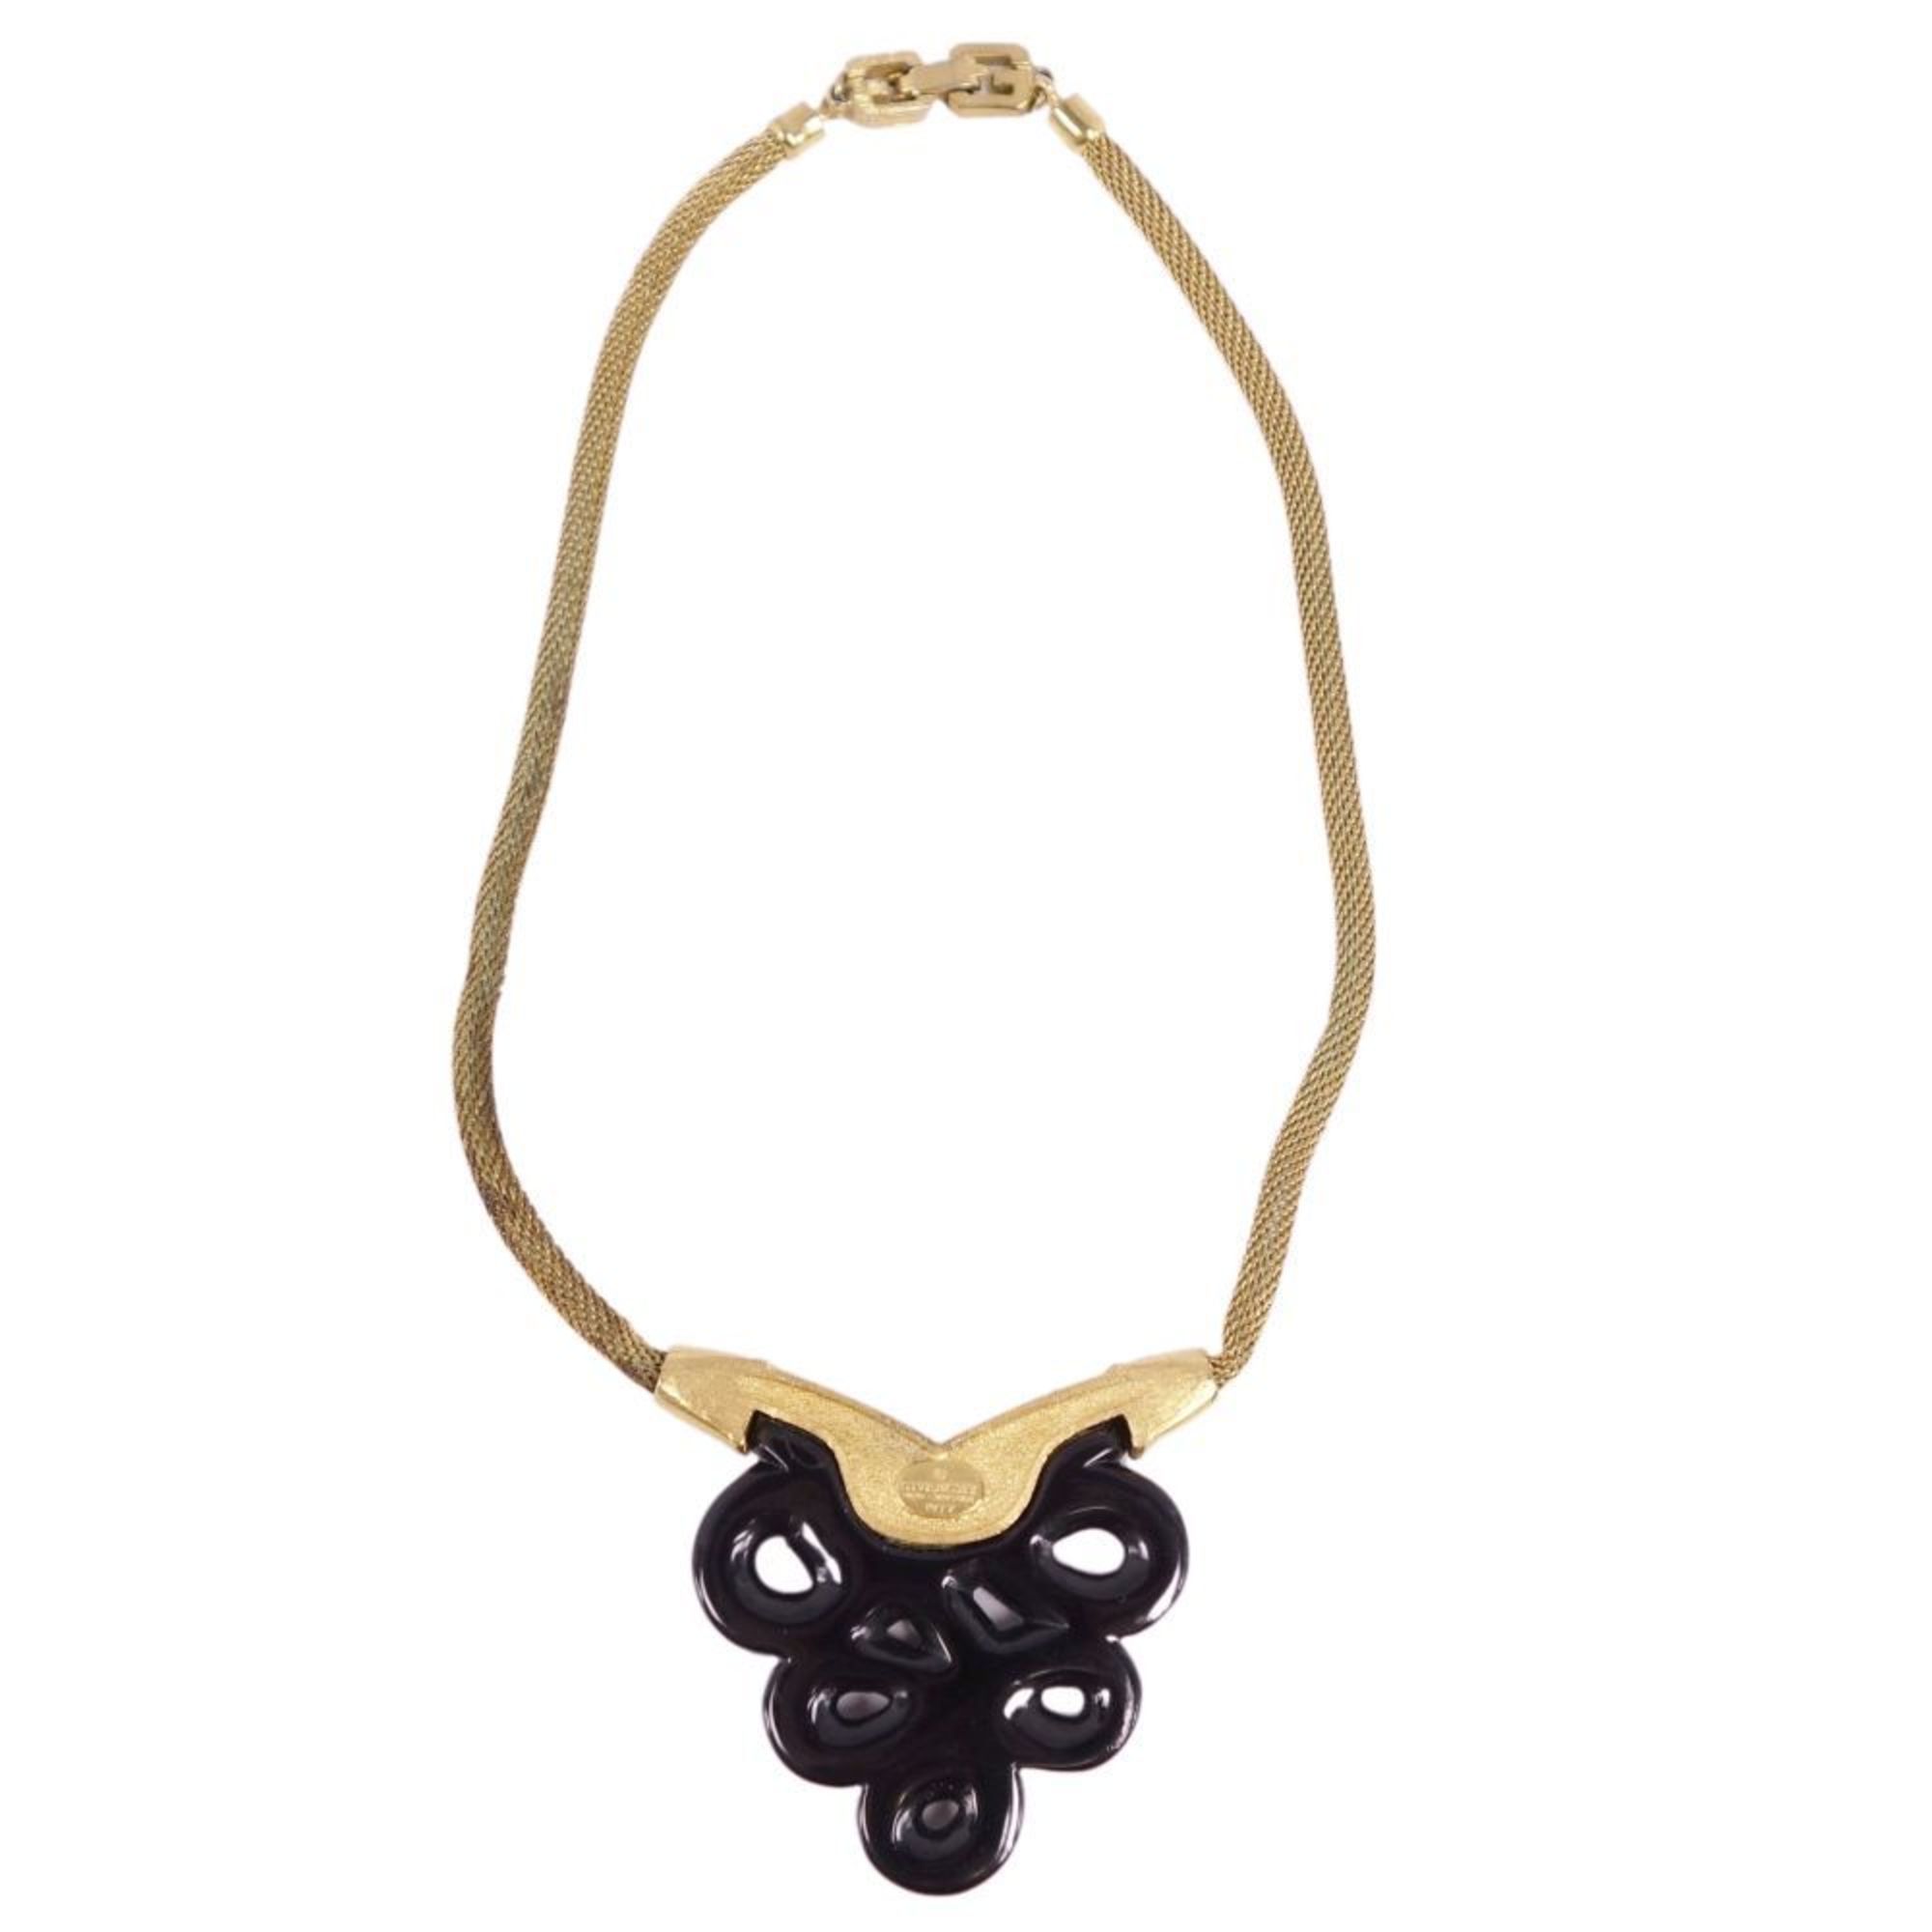 Givenchy choker necklace ladies black/gold